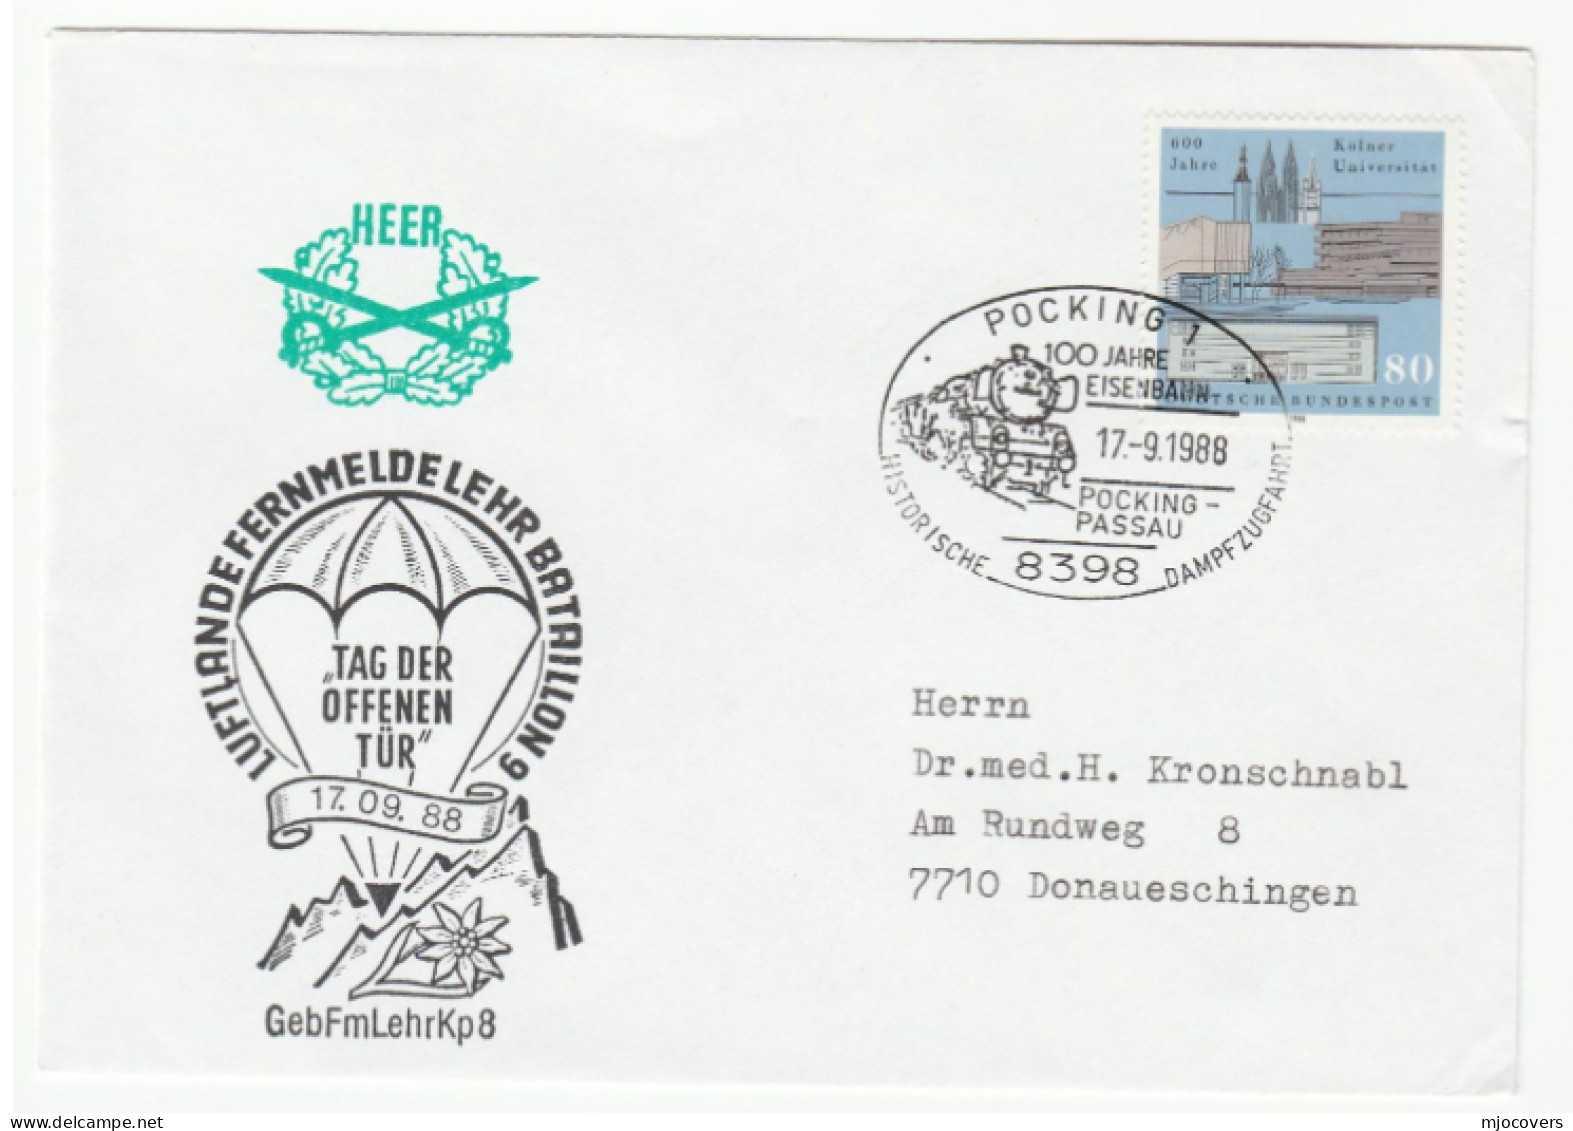 1988 PARACHUTING Airborne Battalion EVENT Cover Germany Military Forces Telecom Telecommunications Stamps Railway Train - Parachutting